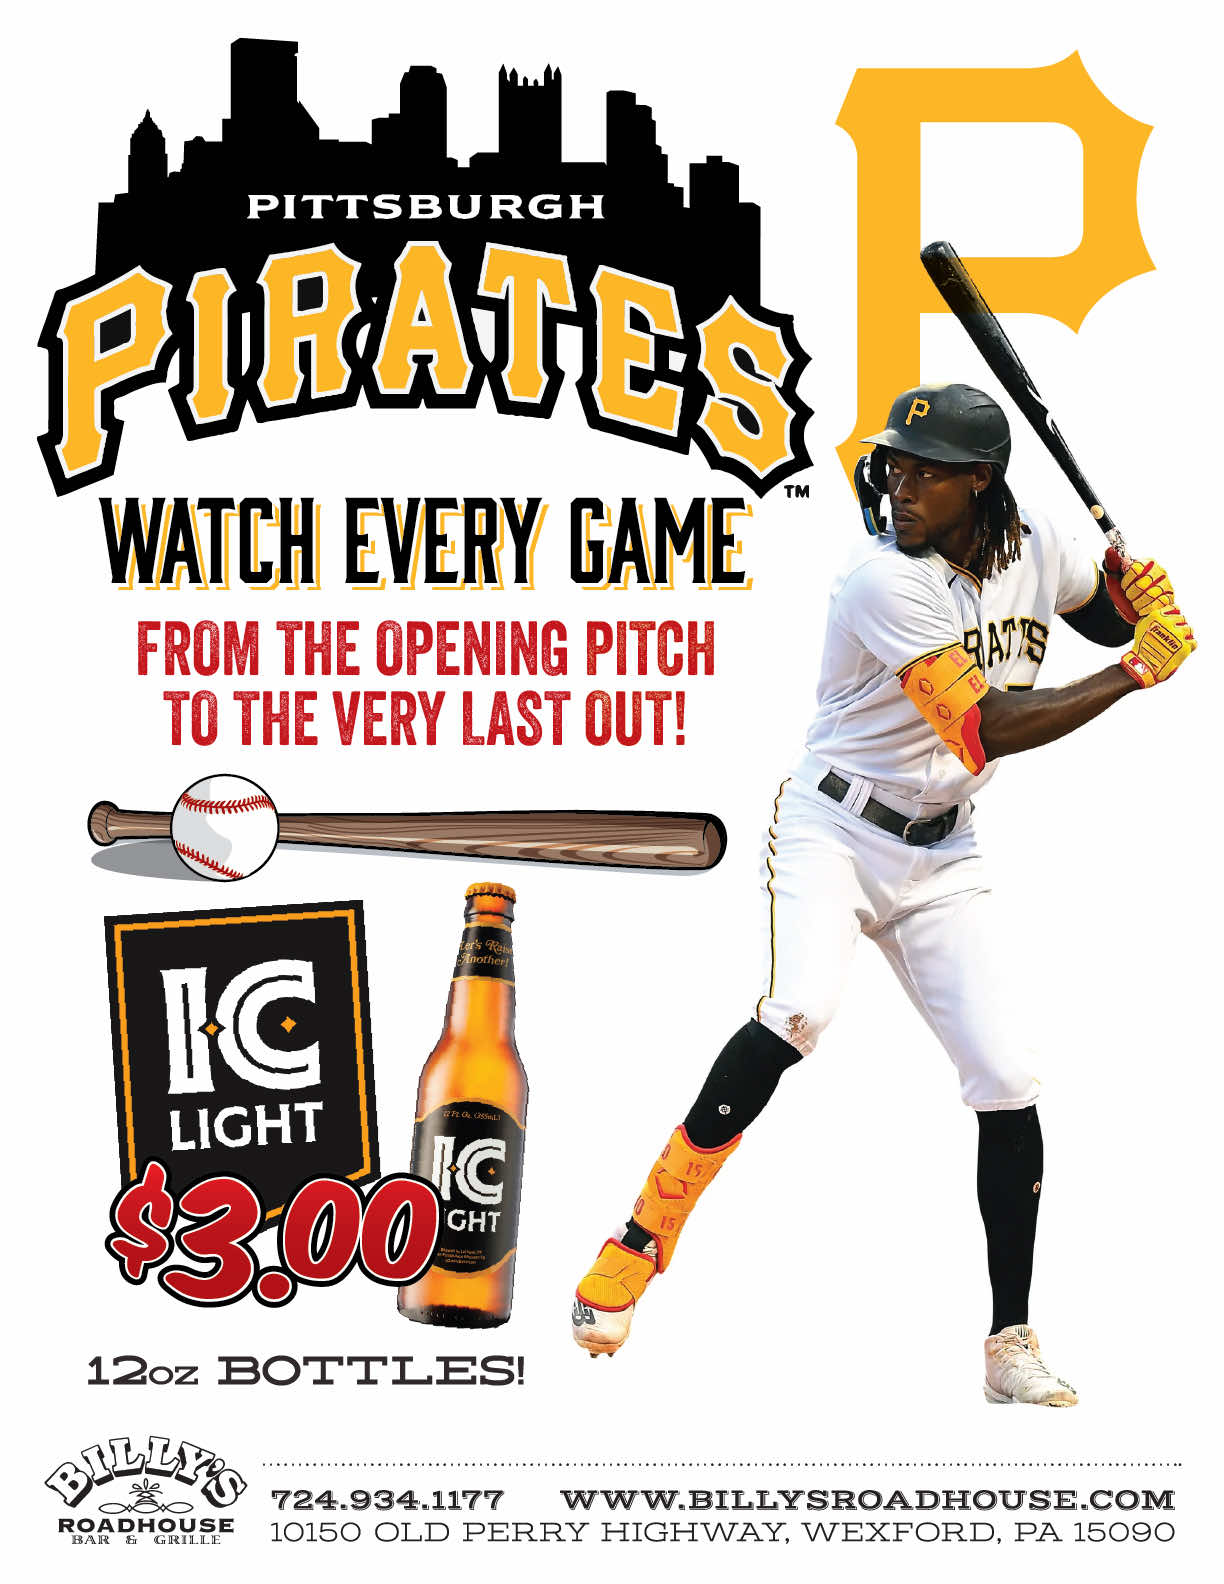 Billy's Roadhouse Specials for Pirates Games!